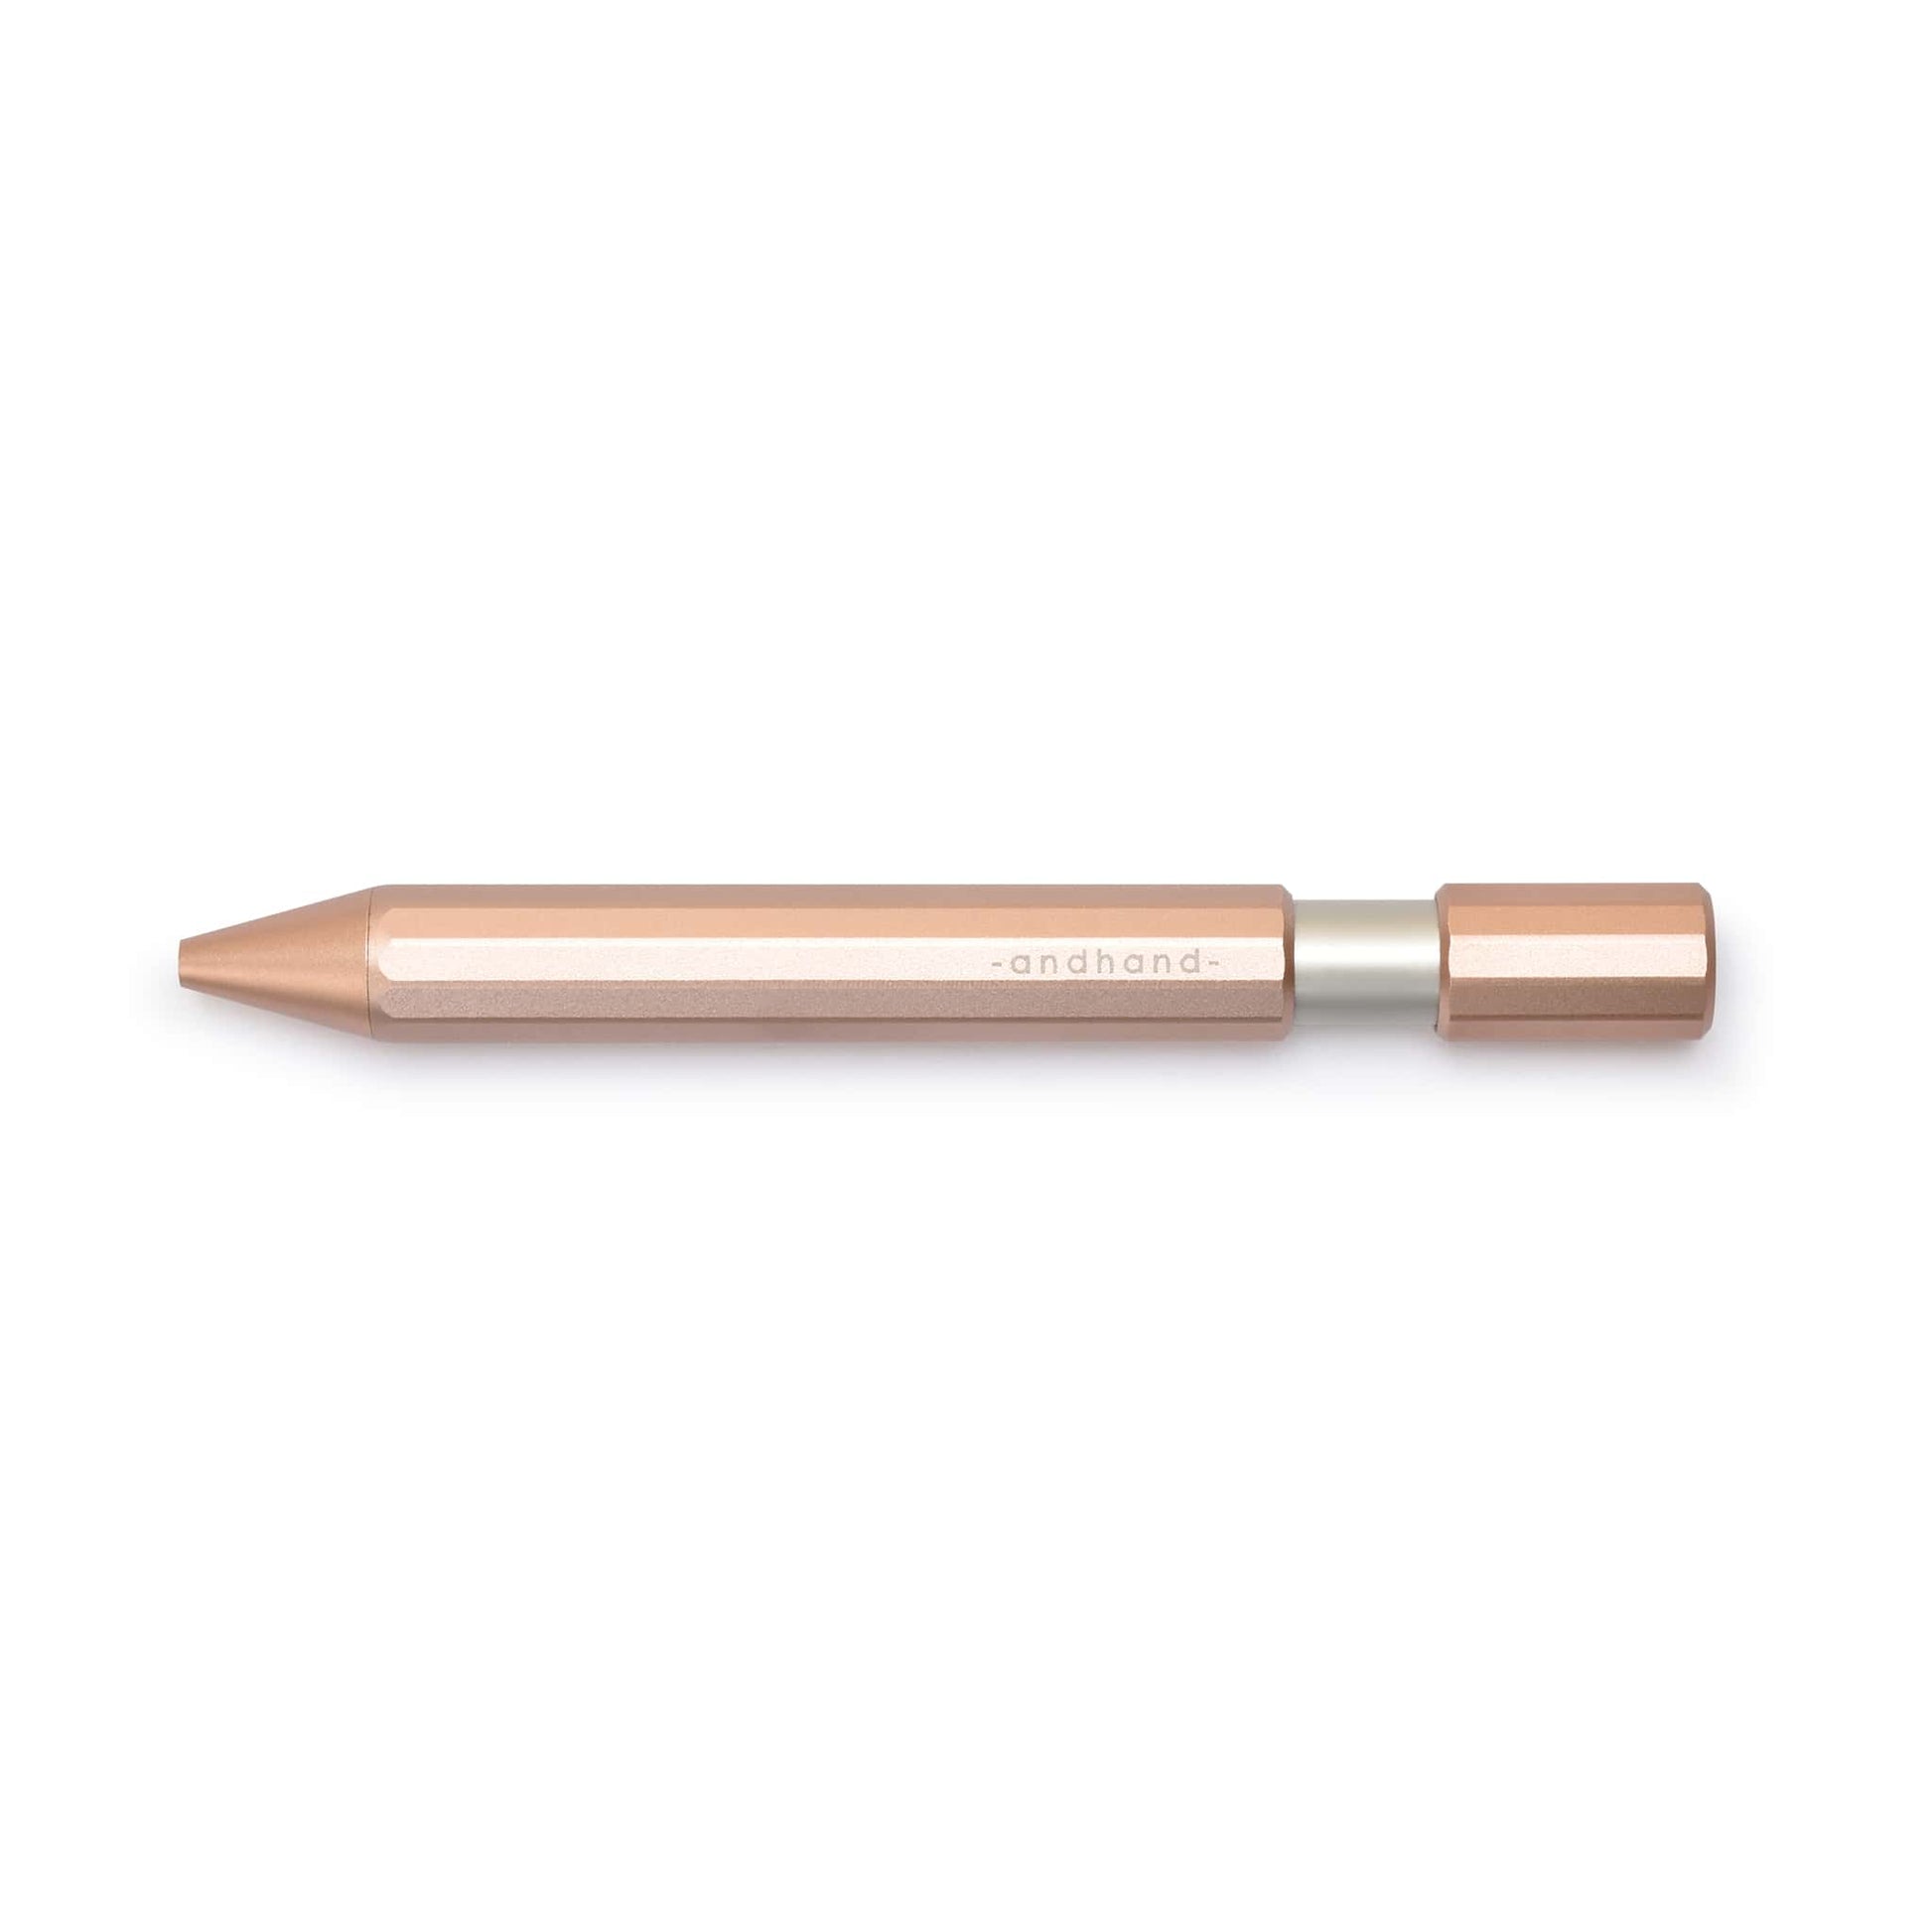 Aspect retractable pen in blush pink anodized finish. A great pen for journaling, sketching or note taking. Equipped with a capless system rollerball cartridge for great ink flow.